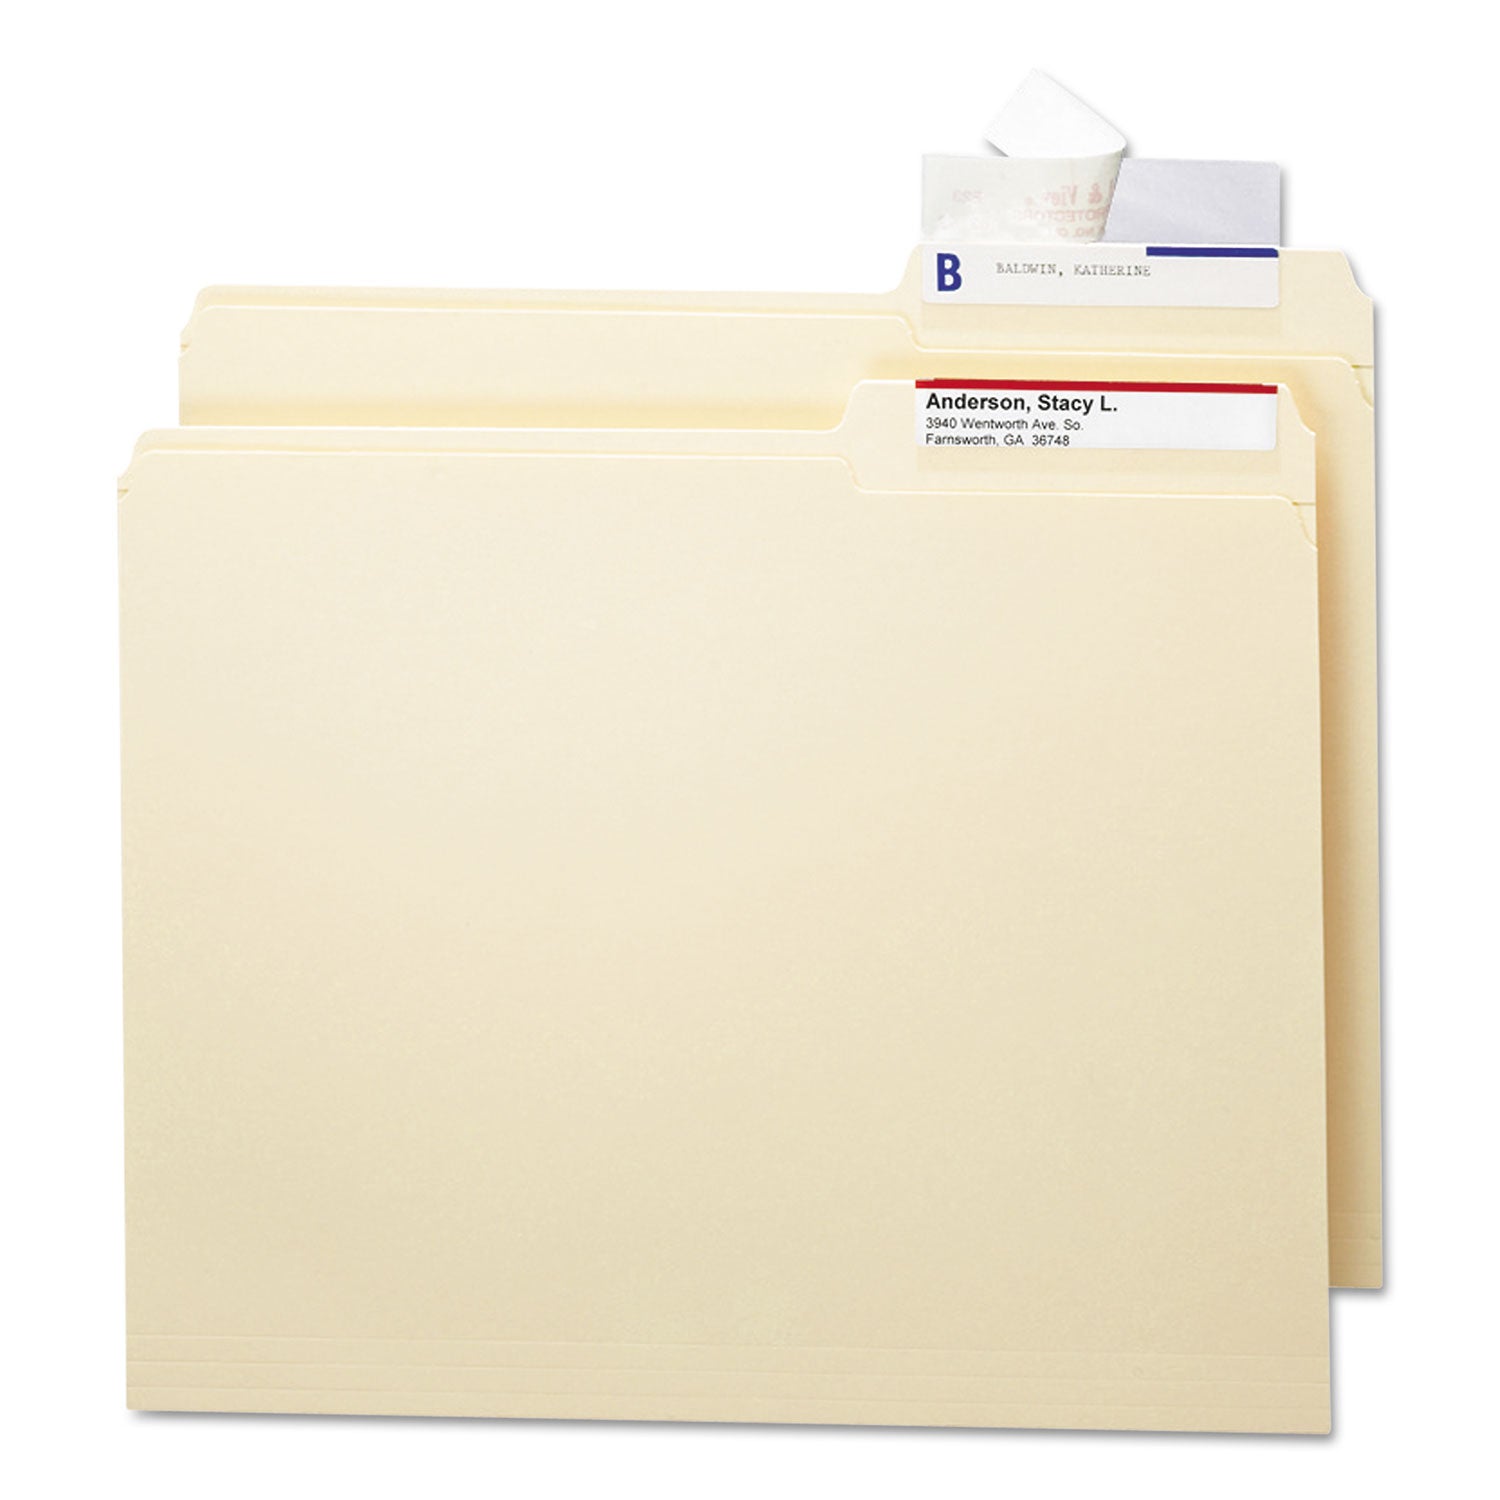 Seal and View File Folder Label Protector, Clear Laminate, 3.5 x 1.69, 100/Pack - 